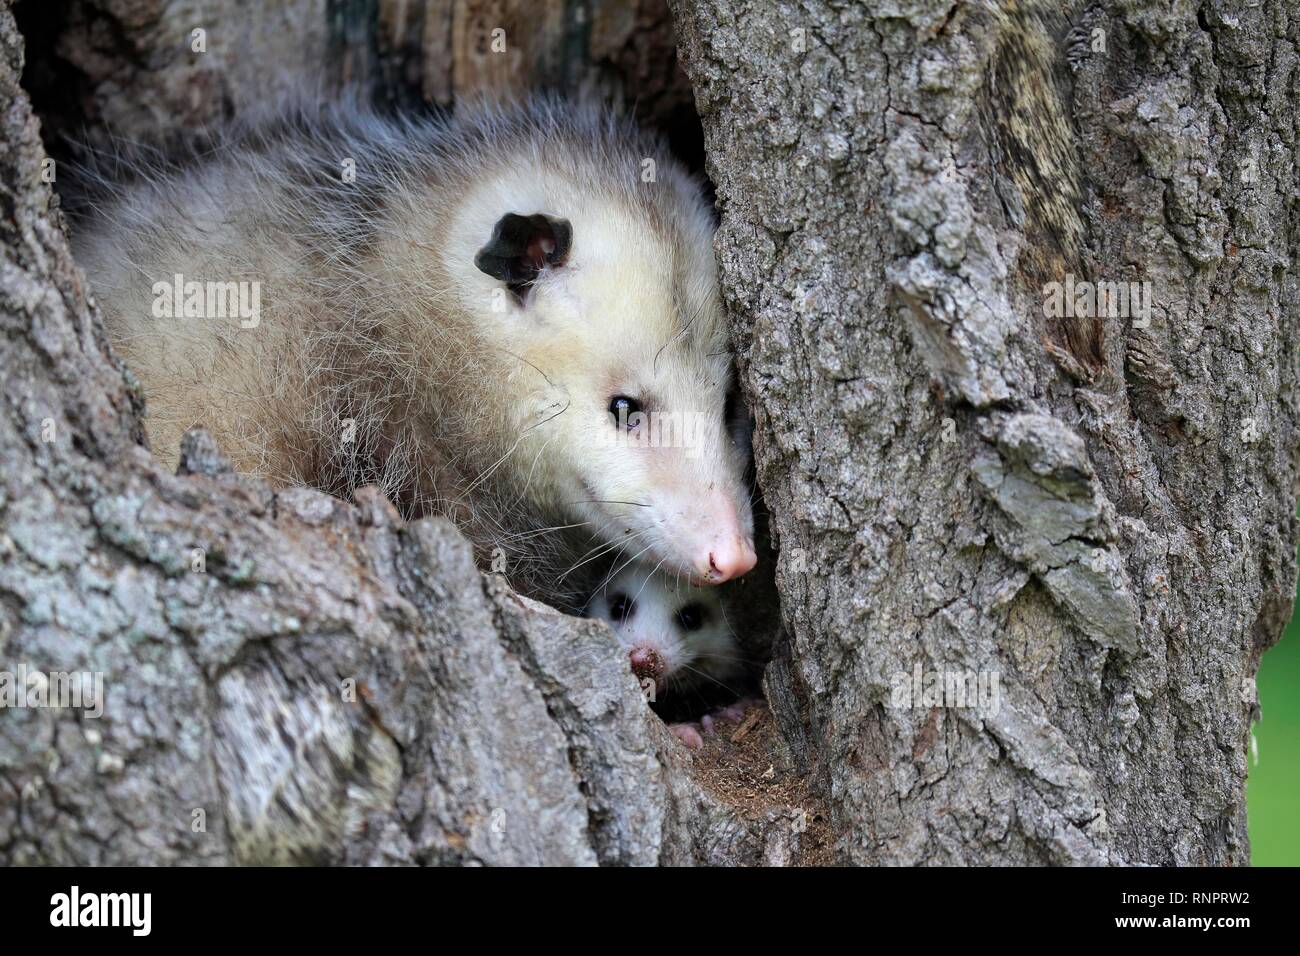 Virginia Opossum (Didelphis virginiana), adult with young animal looks curious from tree hole, Pine County, Minnesota, USA Stock Photo